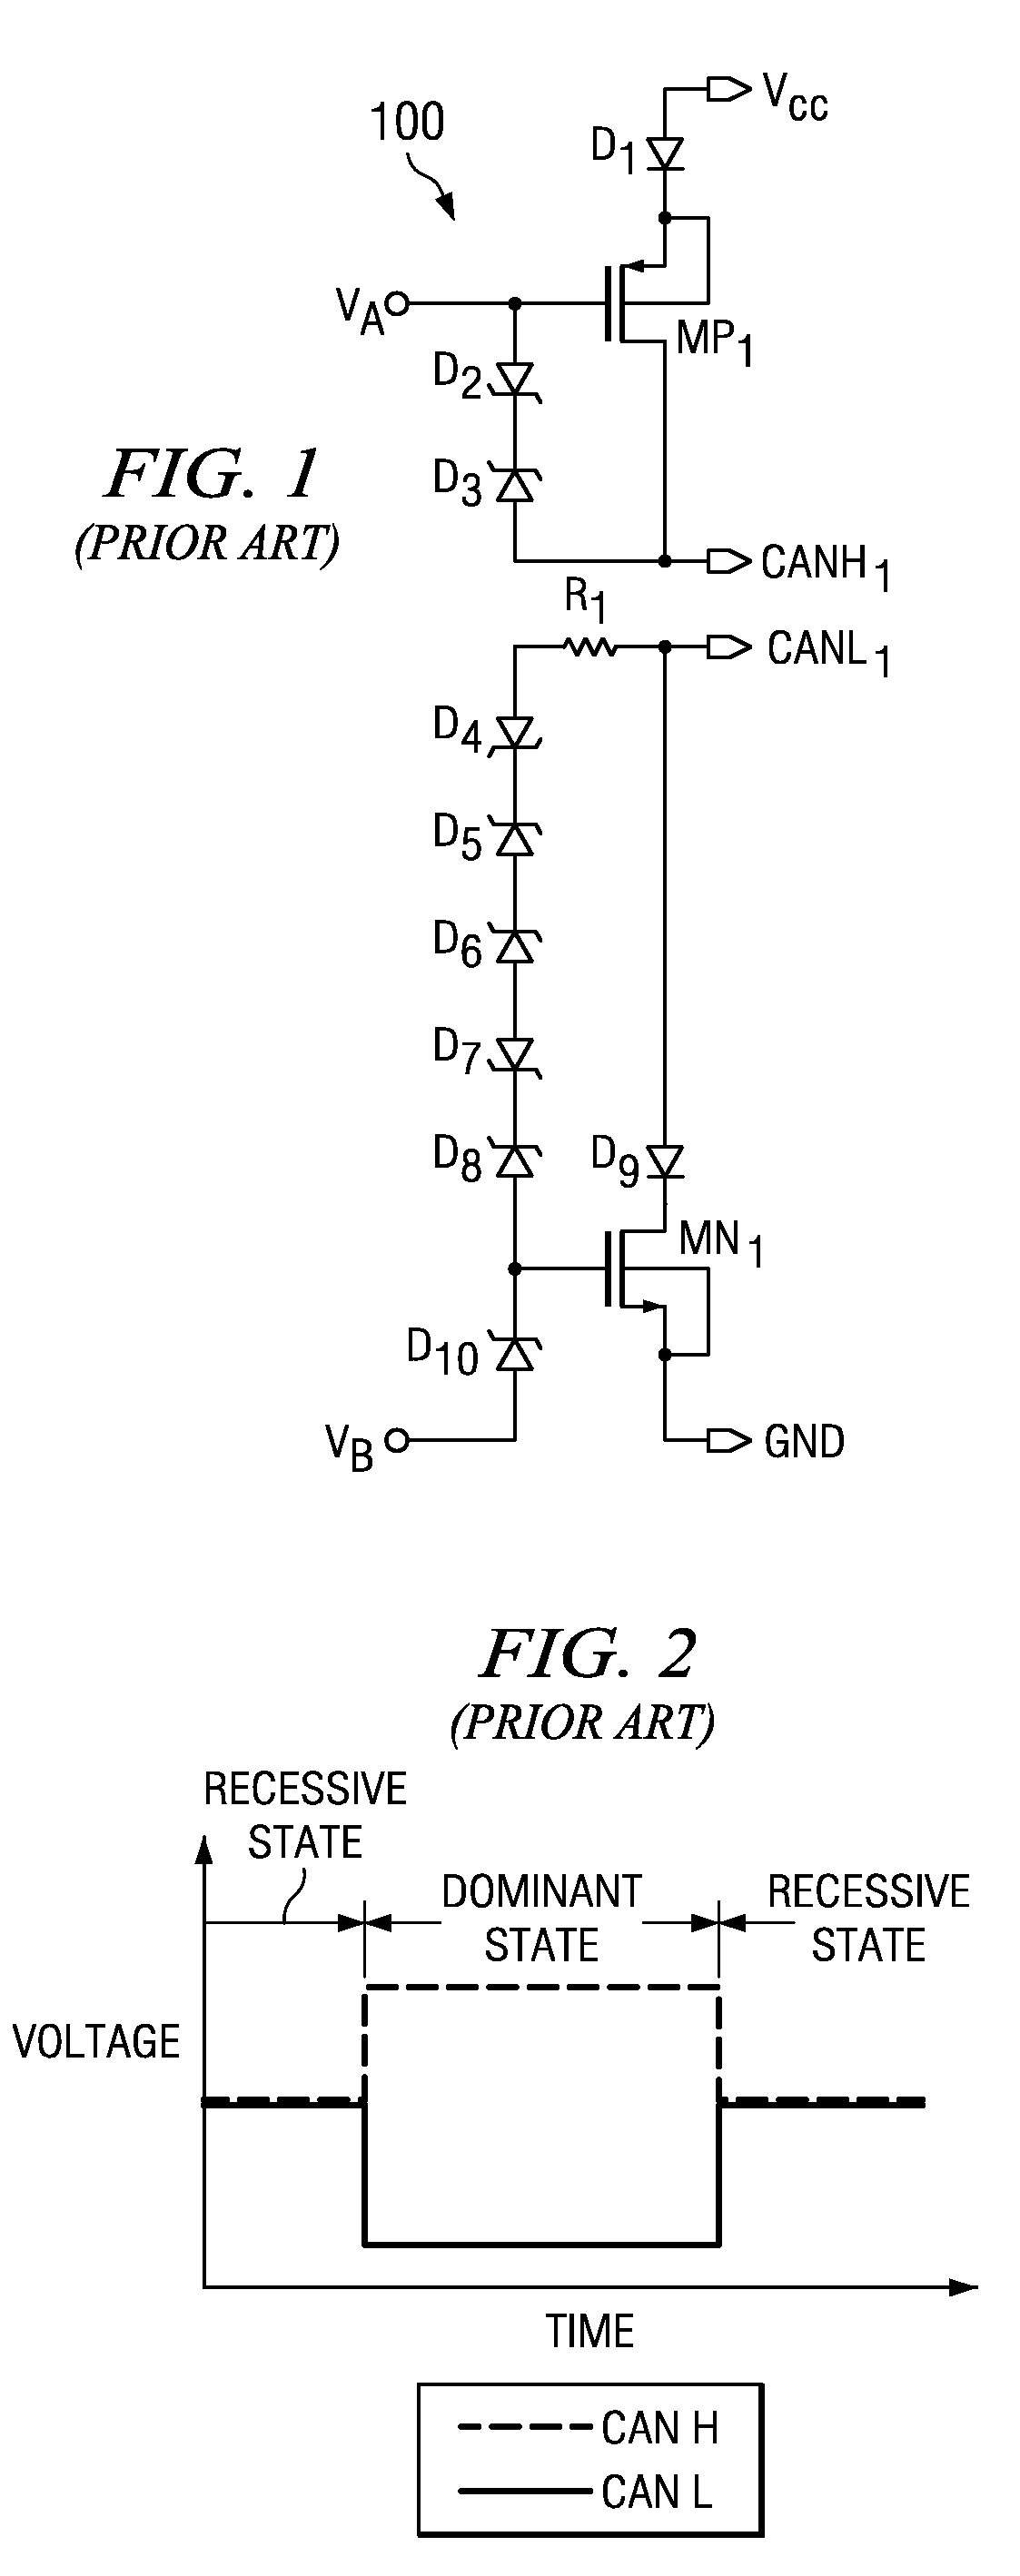 Common mode stabilization circuit for differential bus networks